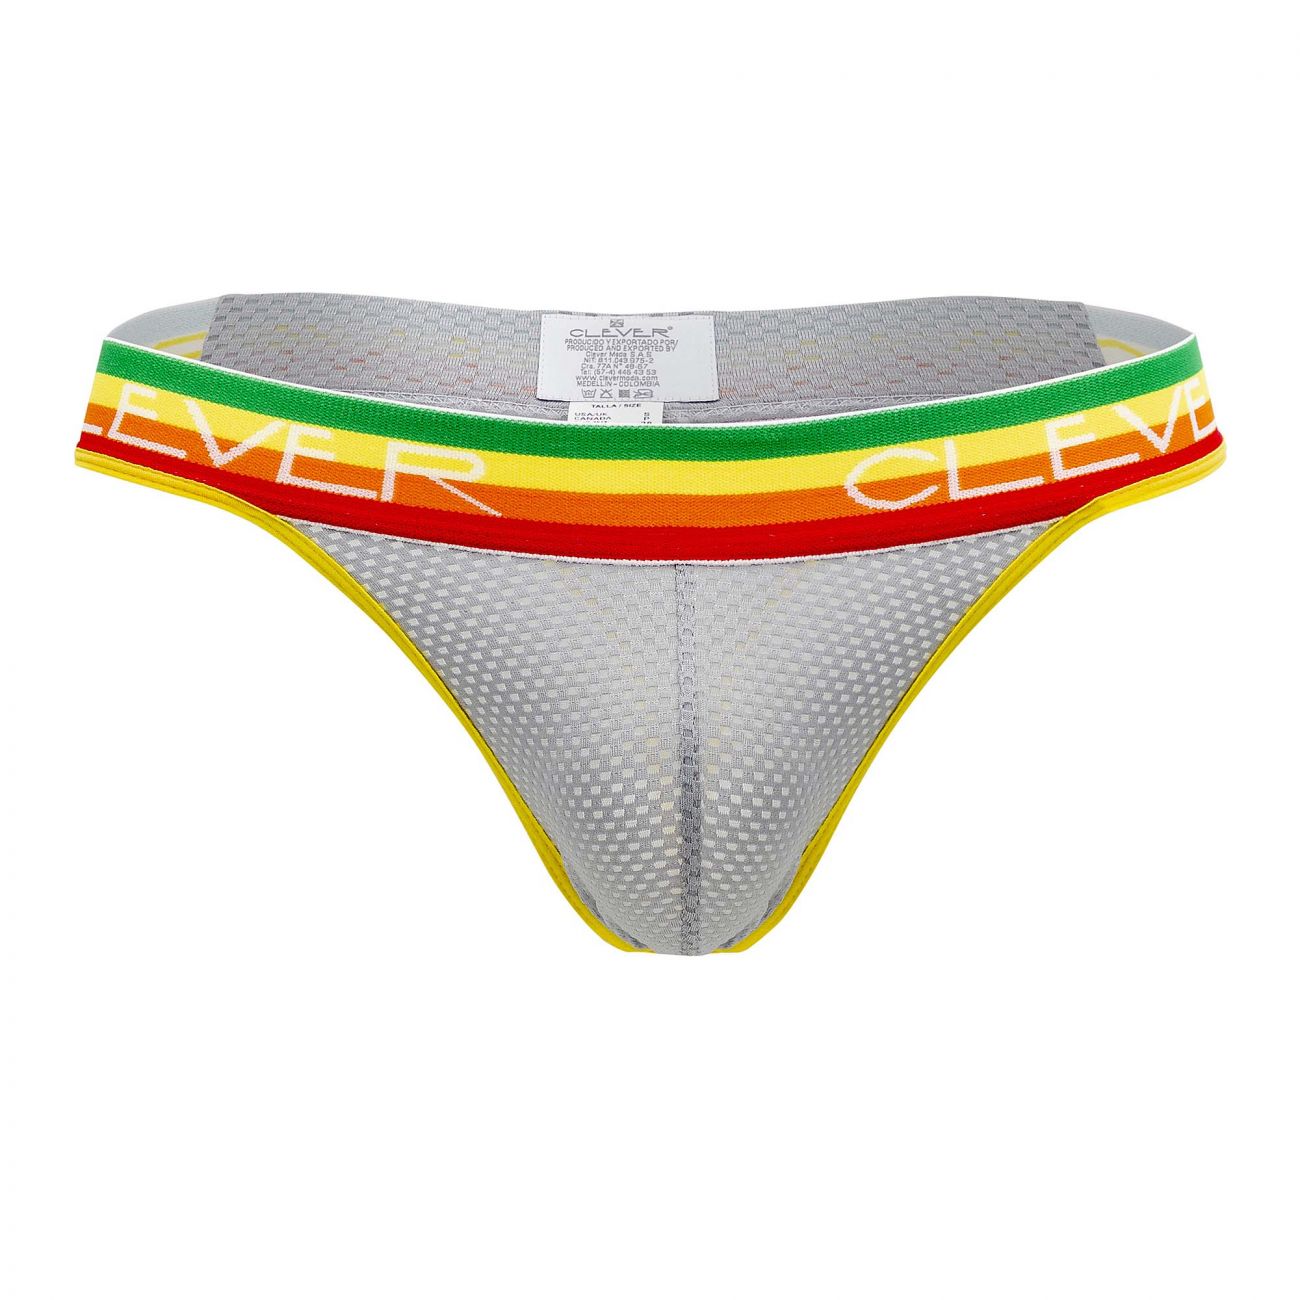 Clever 0925 Luky Thongs Gray Rainbow